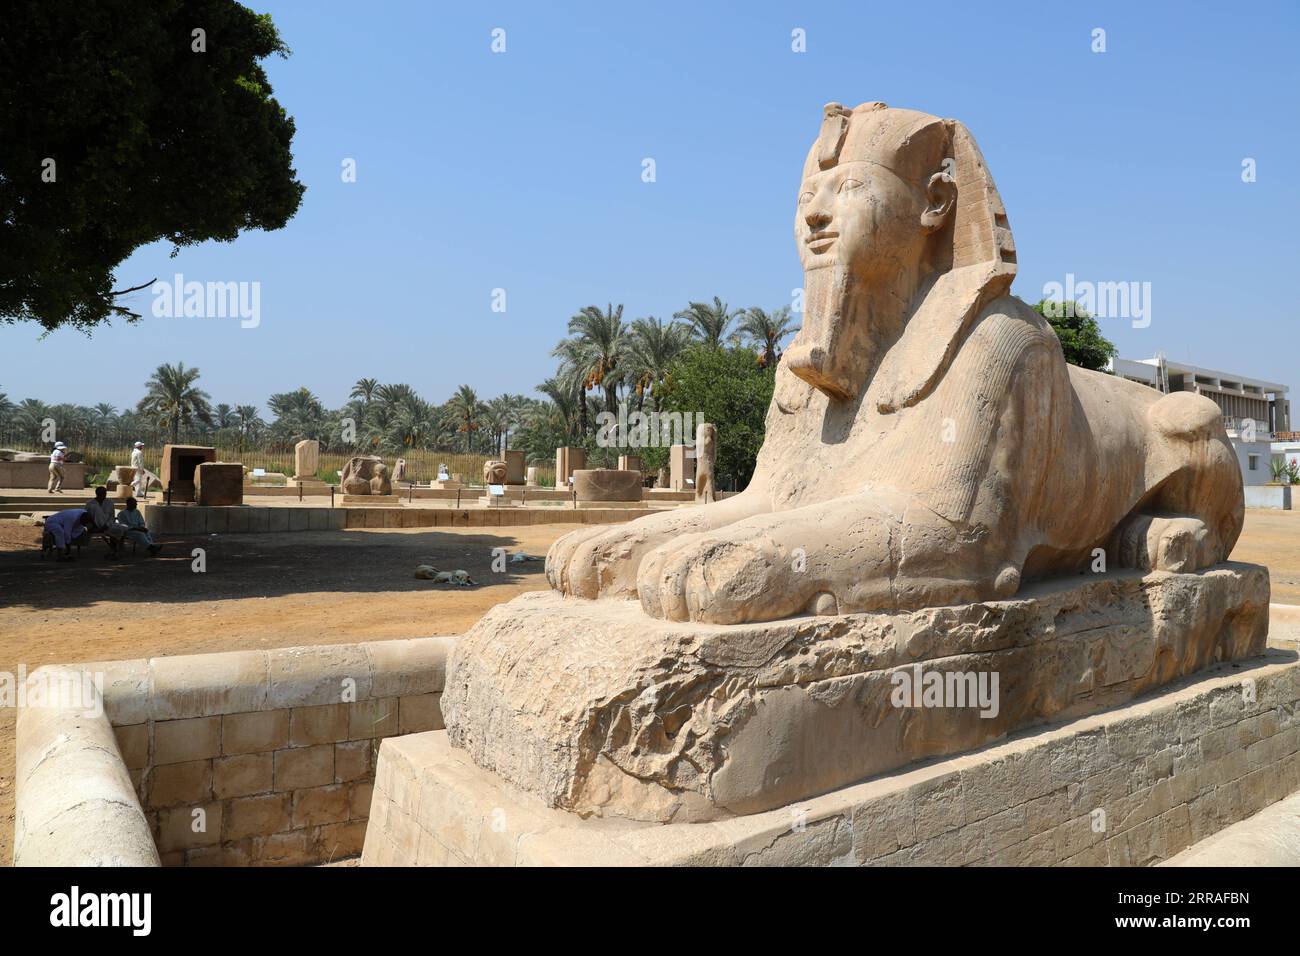 210728 -- CAIRO, July 28, 2021 -- Photo taken on July 28, 2021 shows the statue of Sphinx at the ruins of ancient Egyptian city of Memphis, around 23 kilometers southwest to Cairo, capital of Egypt. Memphis, founded around 3,100 BC, was the capital of ancient Egypt during the Old Kingdom spanning from 2700-2200 BC and remained an important city throughout ancient Egyptian history. Today, the ruins of the former capital offer fragmented evidence of its past. Together with its necropolis the pyramid fields from Giza to Dahshur, Memphis was inscribed as a World Heritage Site in 1979. The site is Stock Photo